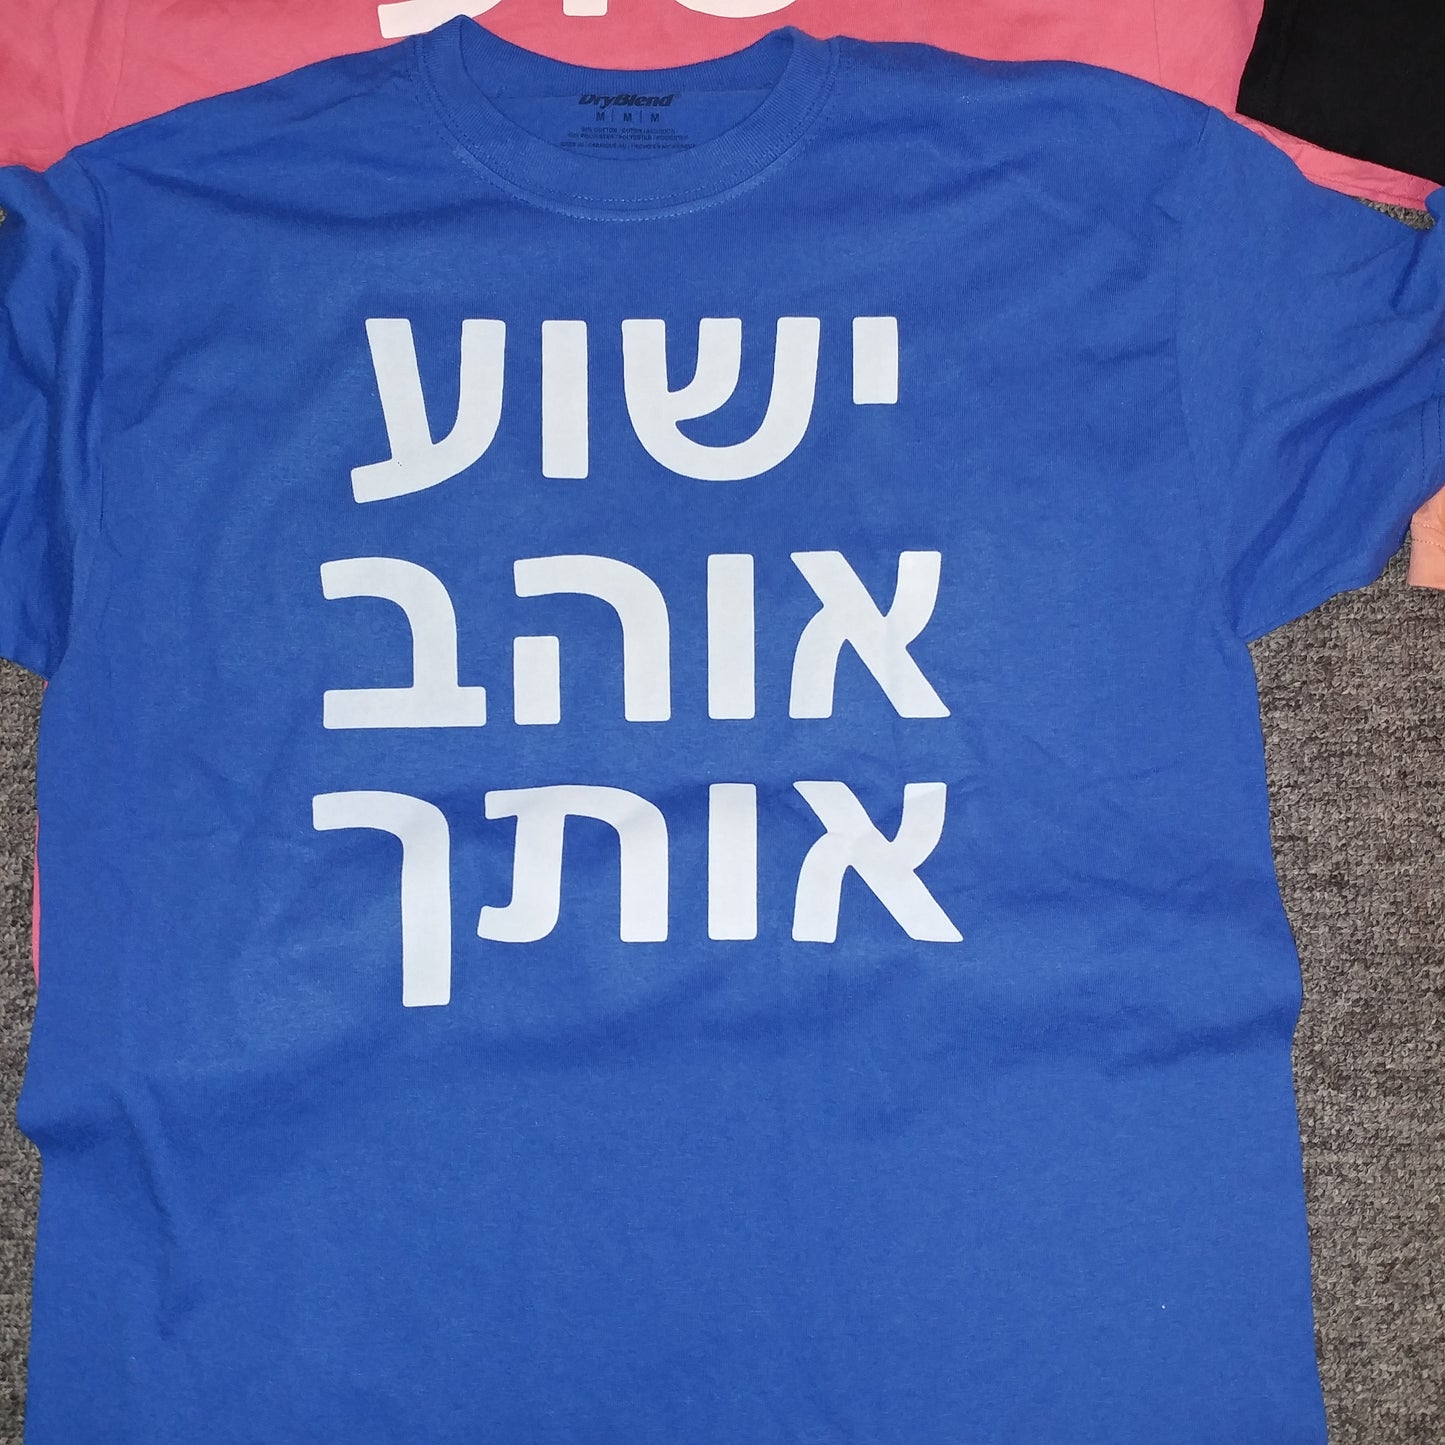 T-Shirt in HEBREW - says Yeshua Loves You!